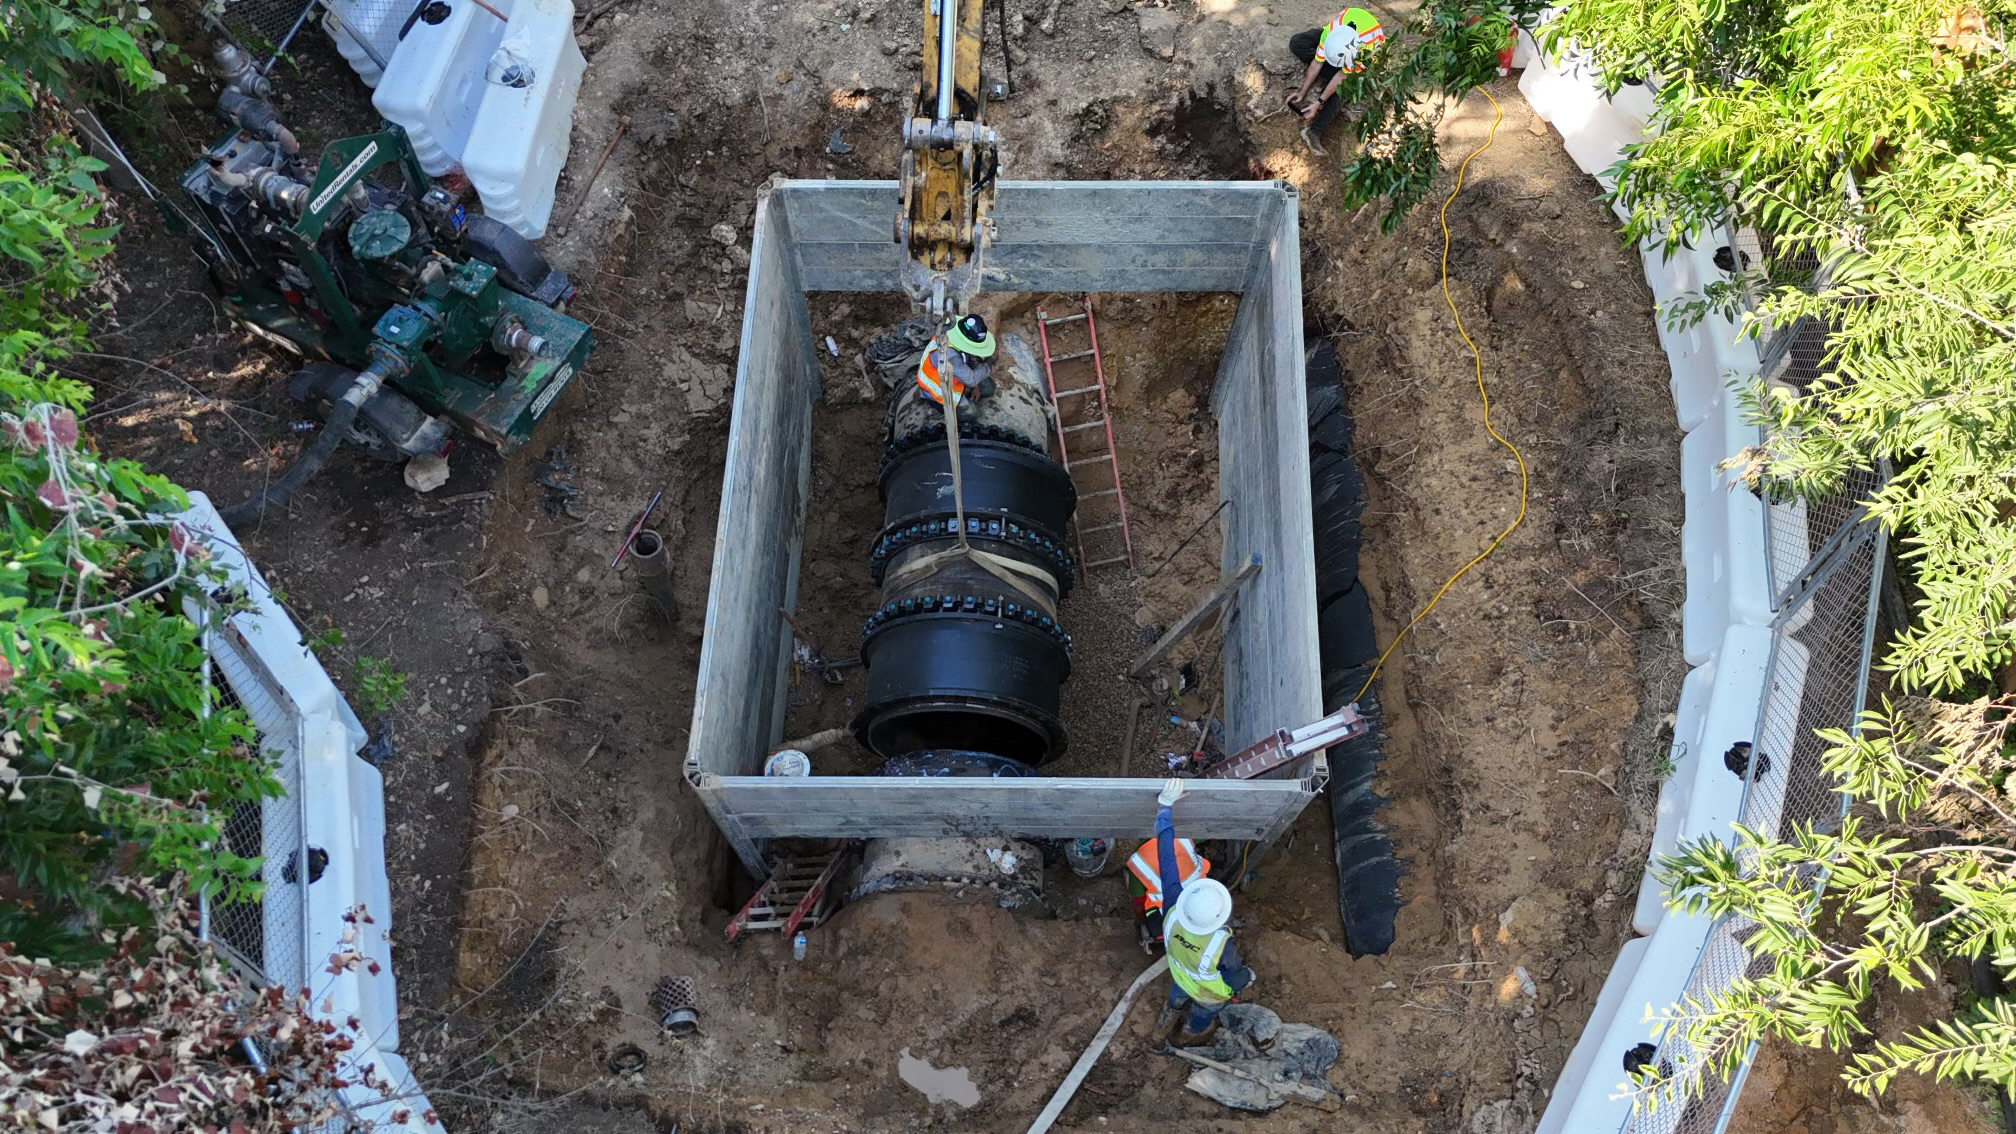 Overhead shot of new large pipe replacement being put in place